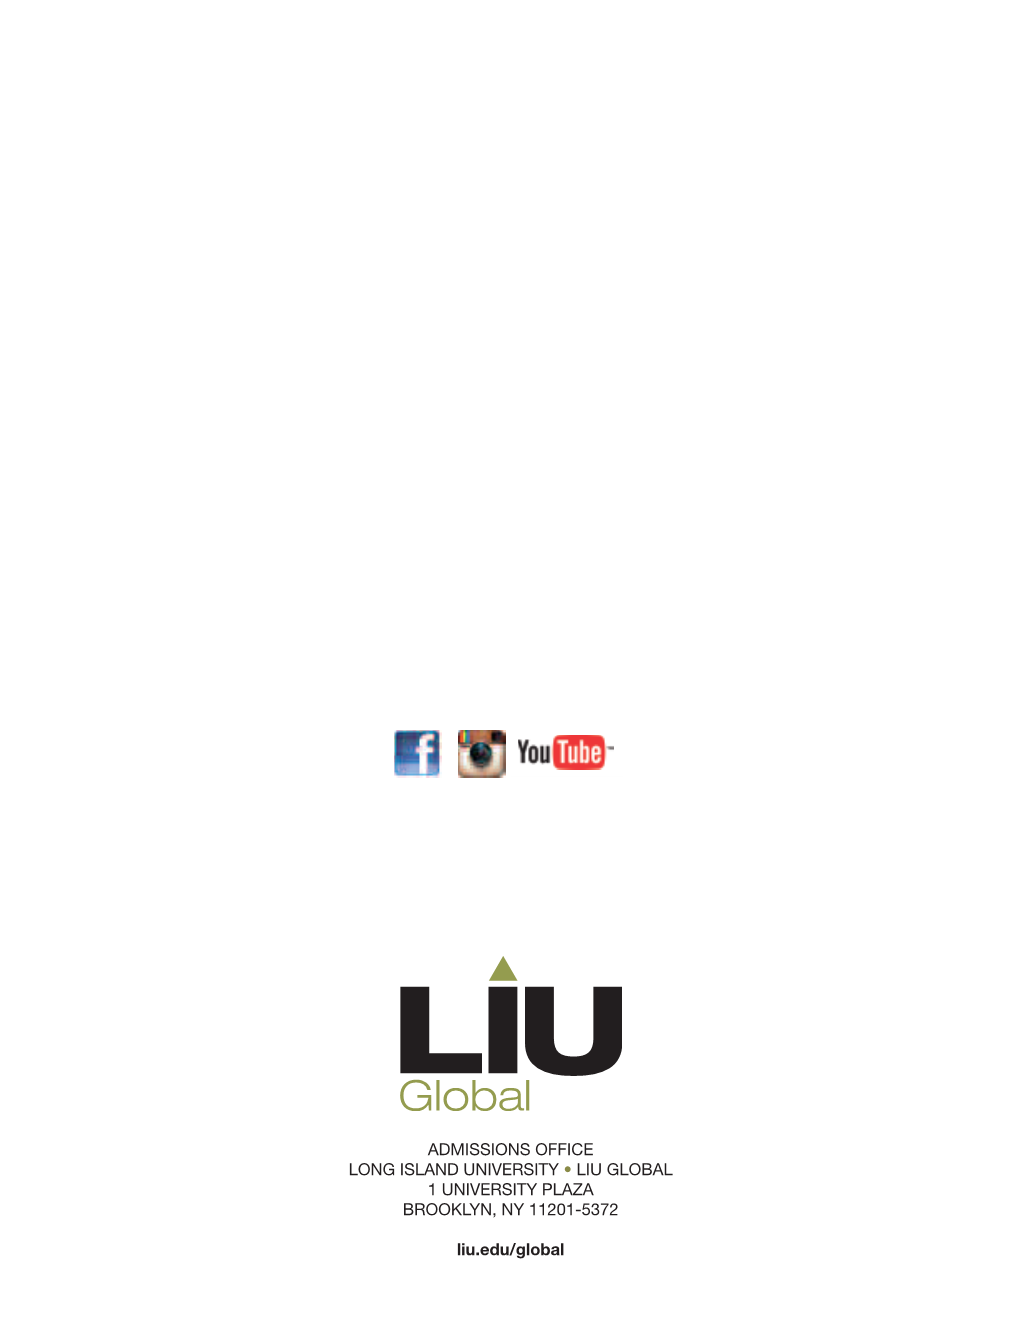 Call 718-488-1011 to Speak with an LIU Global Admissions Representative and Begin Your Journey